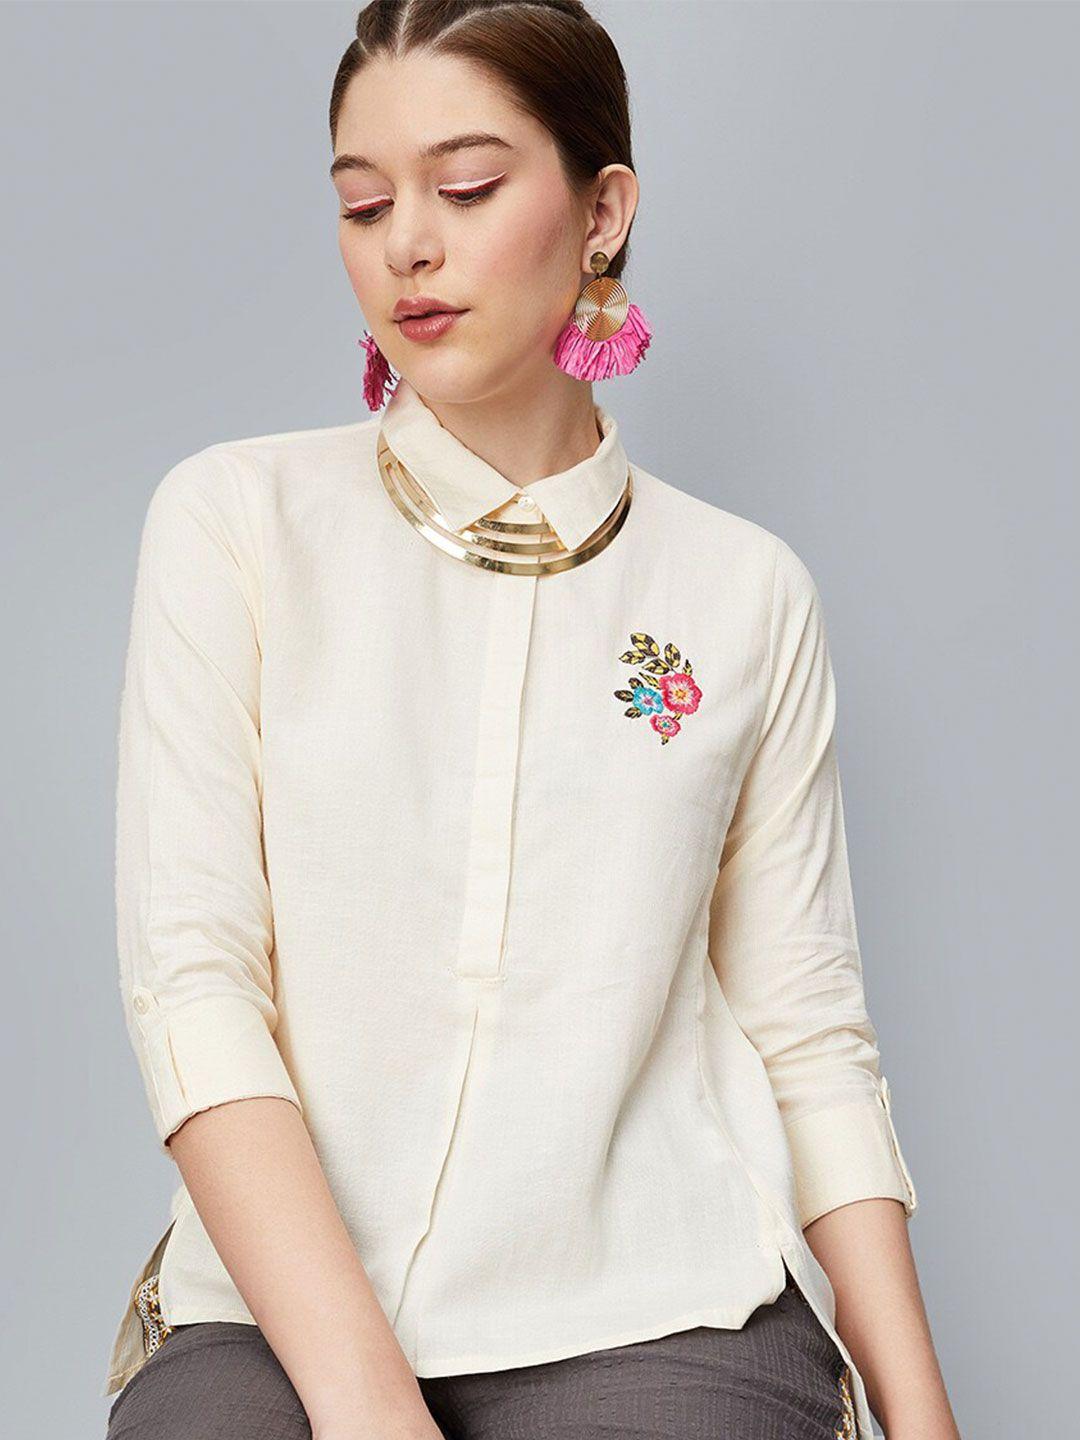 max shirt collar embroidered shirt style top